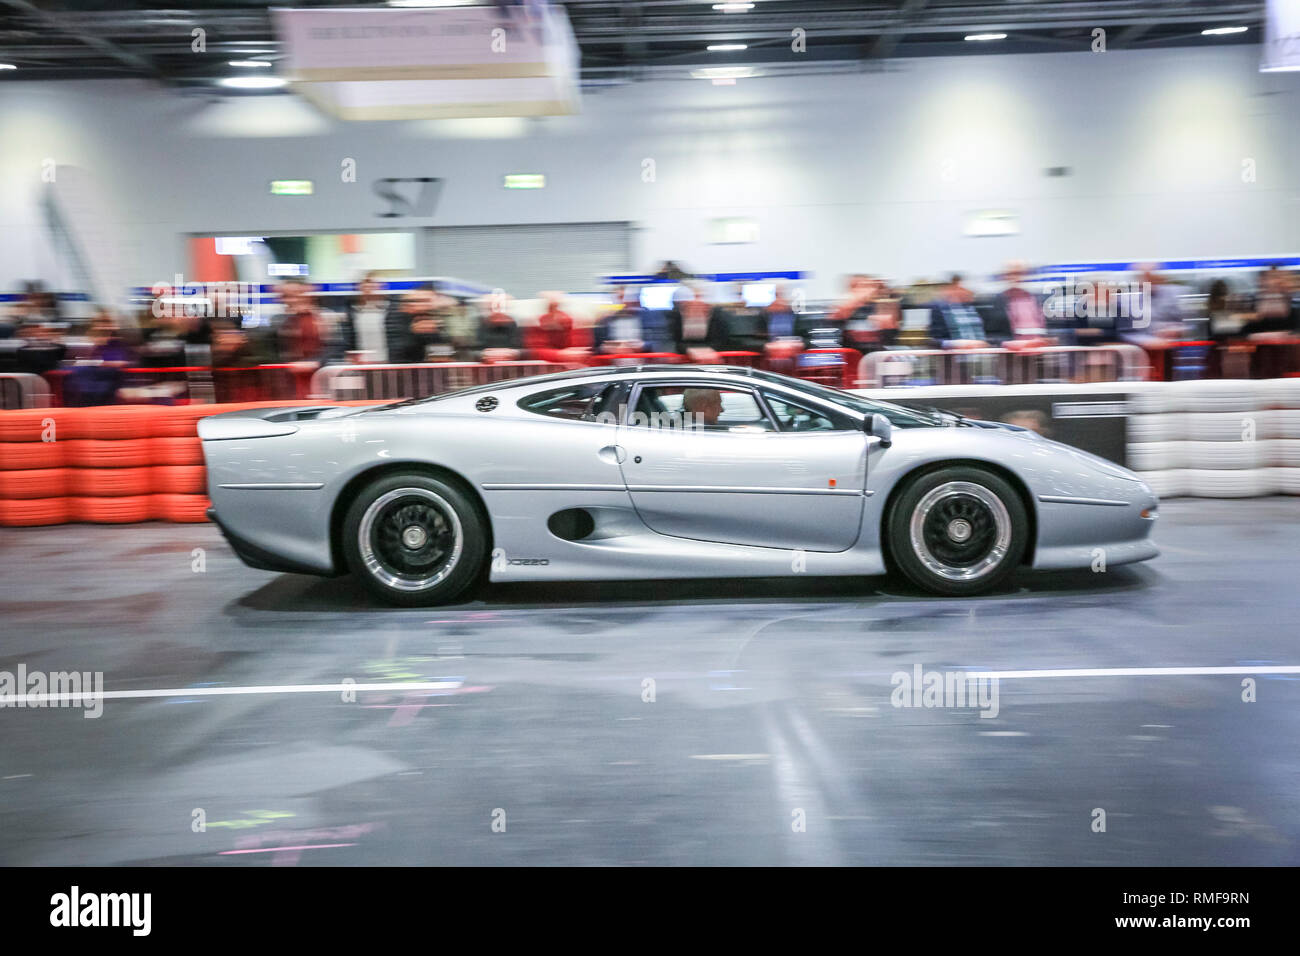 ExCel, London, UK, 14th Feb 2019. A sporty Jaguar XJ220 races down the Grand Avenue track ,The London Classic Car Show 2019 opens at ExCel Exhibition Centre in London Docklands. The show  brings together classic car owners, collectors, experts and enthusiast with dealers, manufacturers and car clubs in a celebration of motoring and classic cars. Credit: Imageplotter News and Sports/Alamy Live News Stock Photo